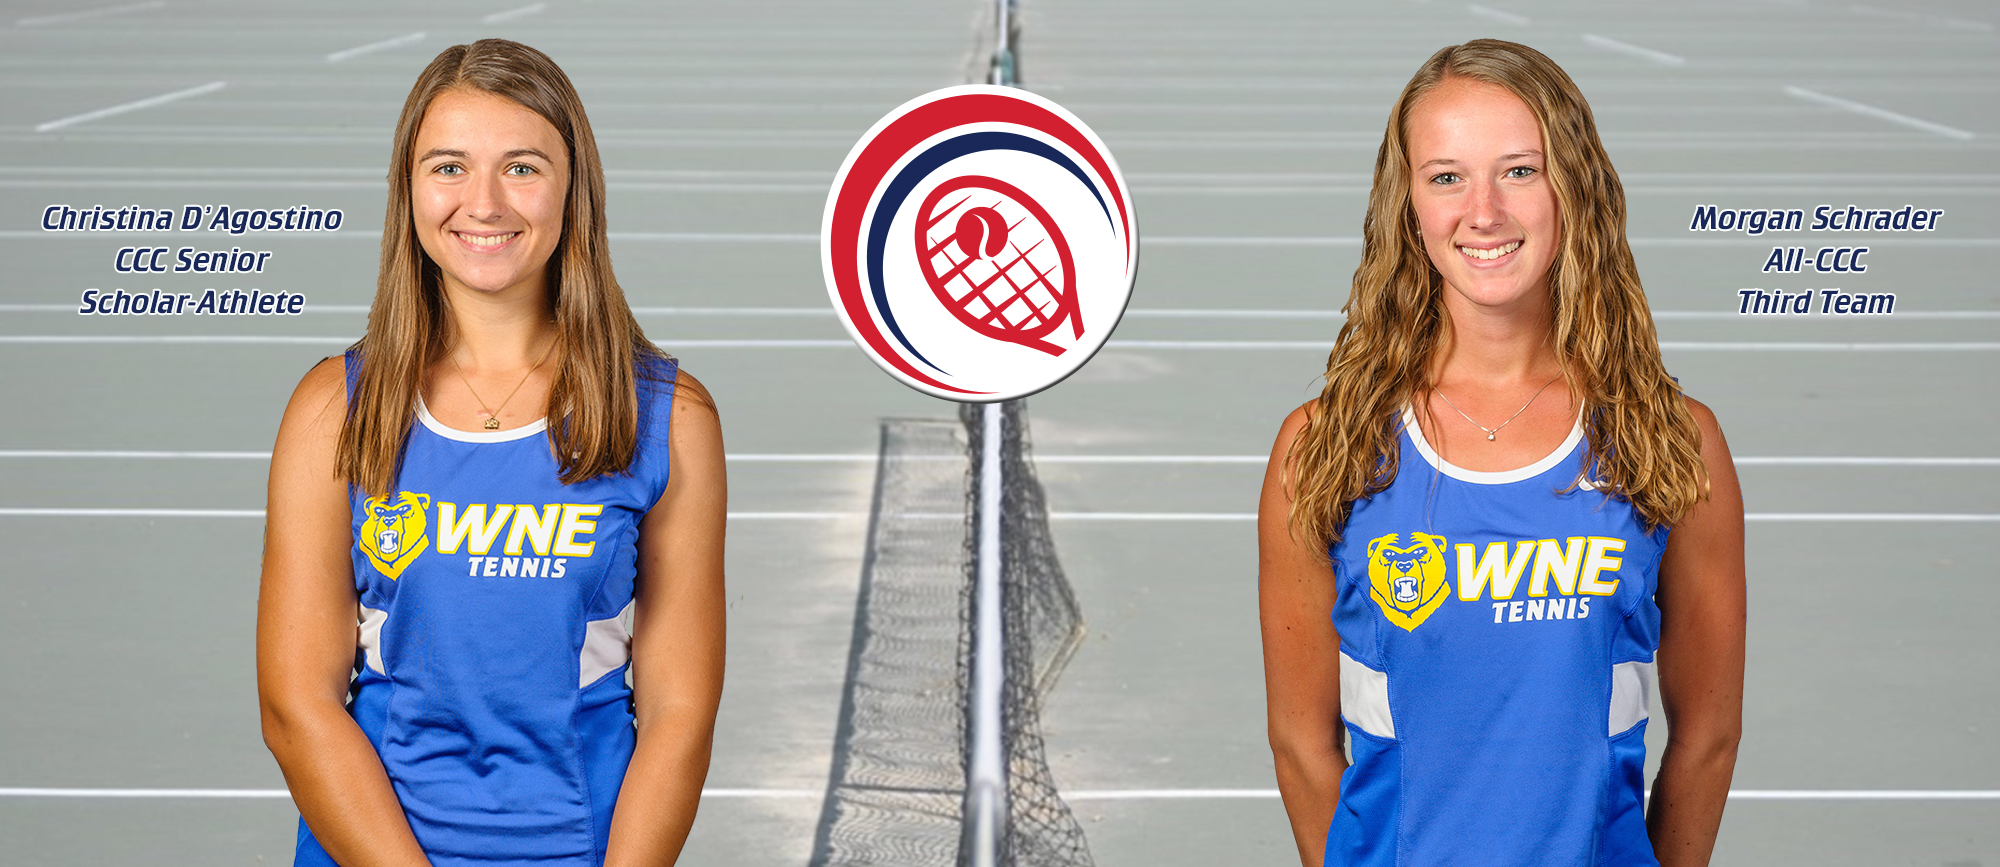 D’Agostino Named CCC Senior Scholar-Athlete, Schrader Earns All-CCC Third Team Honors